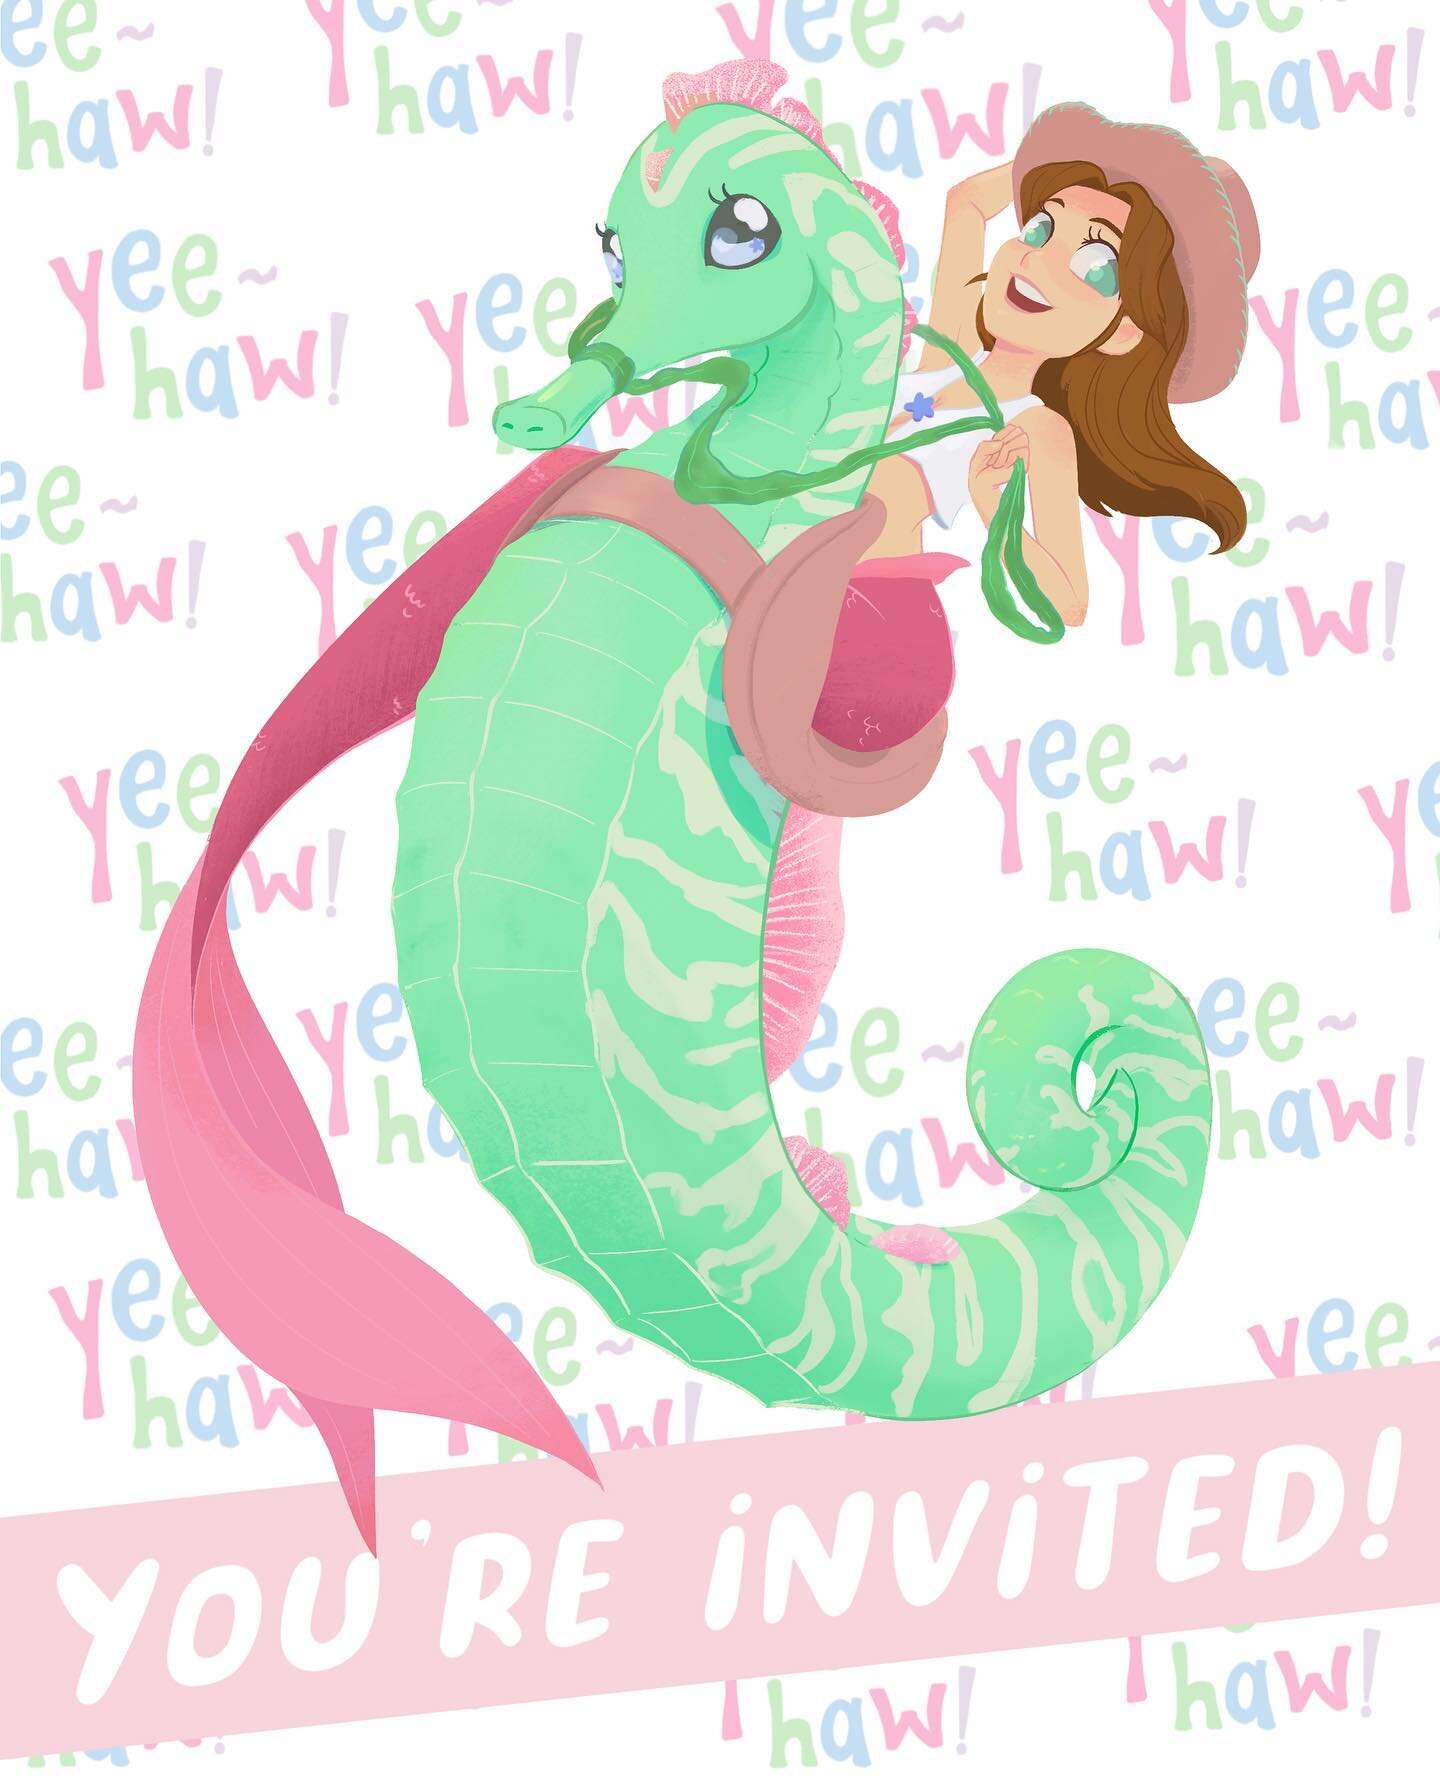 Just a nice lil illustration I made for my bday party invite 😌 It&rsquo;s gonna be held at my fave establishment on the seaport, @cowgirlseahorse, and I&rsquo;m v excited to celebrate with my loved ones. And thrash half of them in trivia 🤠
.
Also i